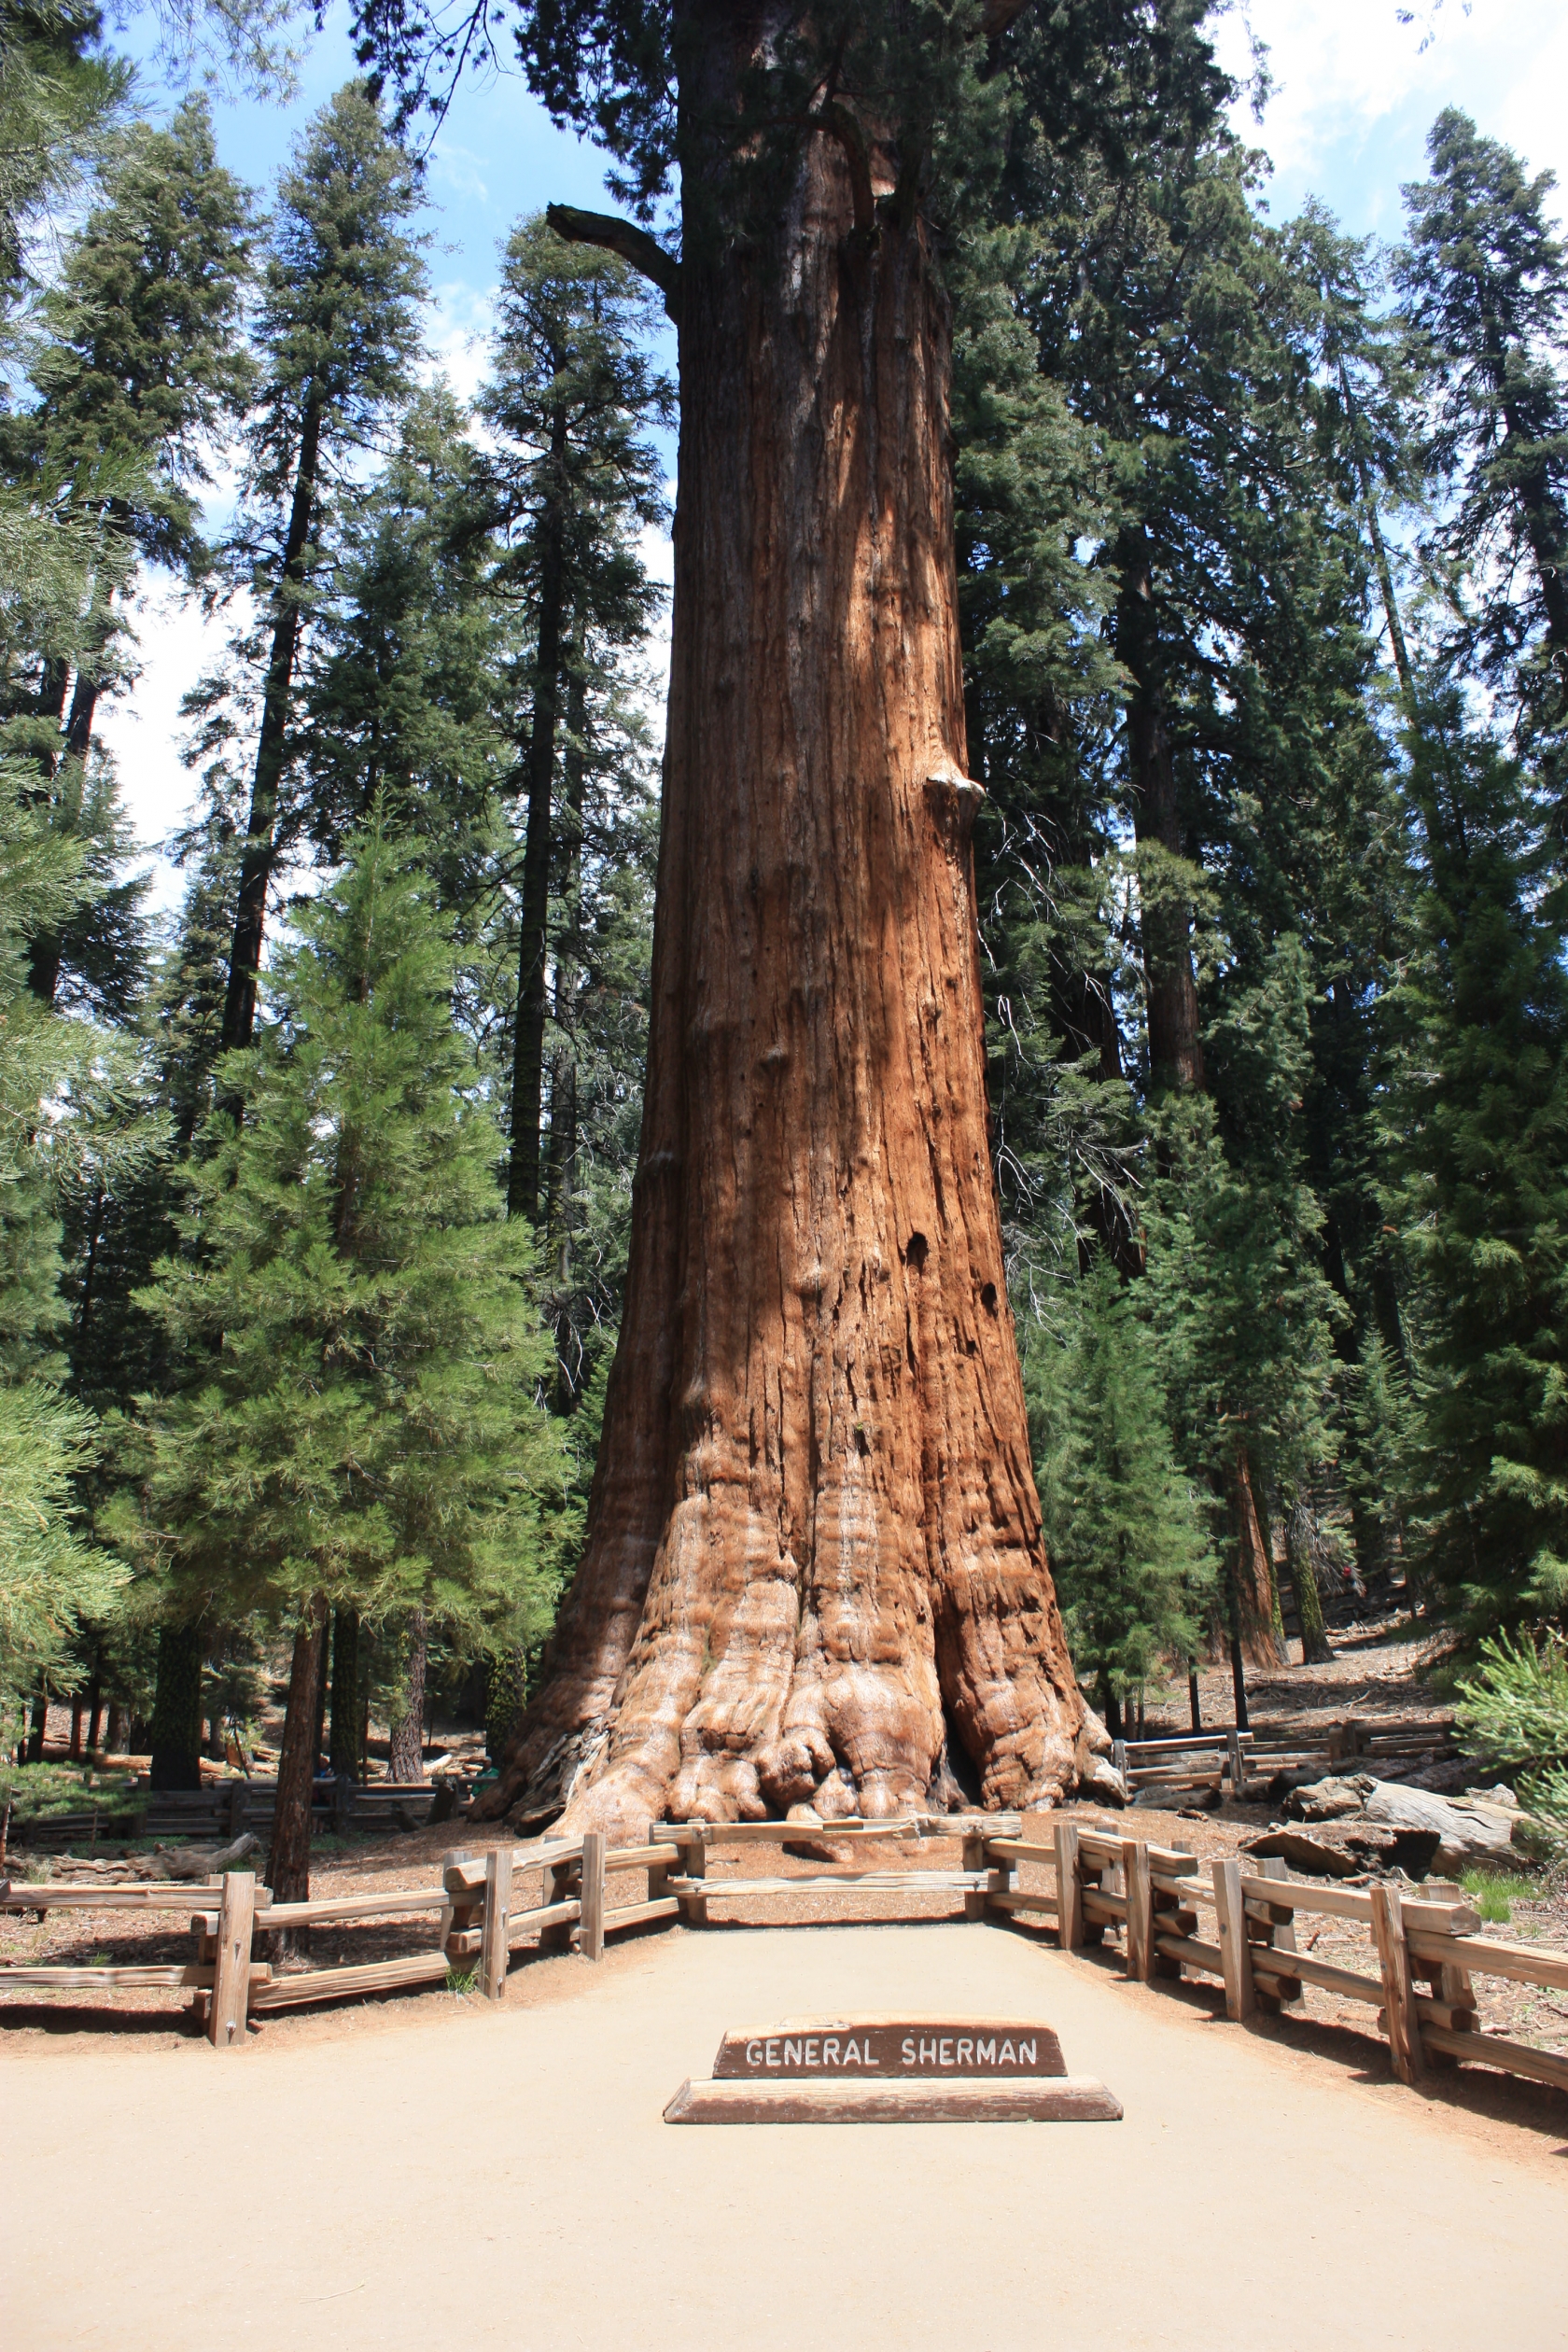 Giant redwood tree with a plaque saying "General Sherman" in front of it at Sequoia National Park